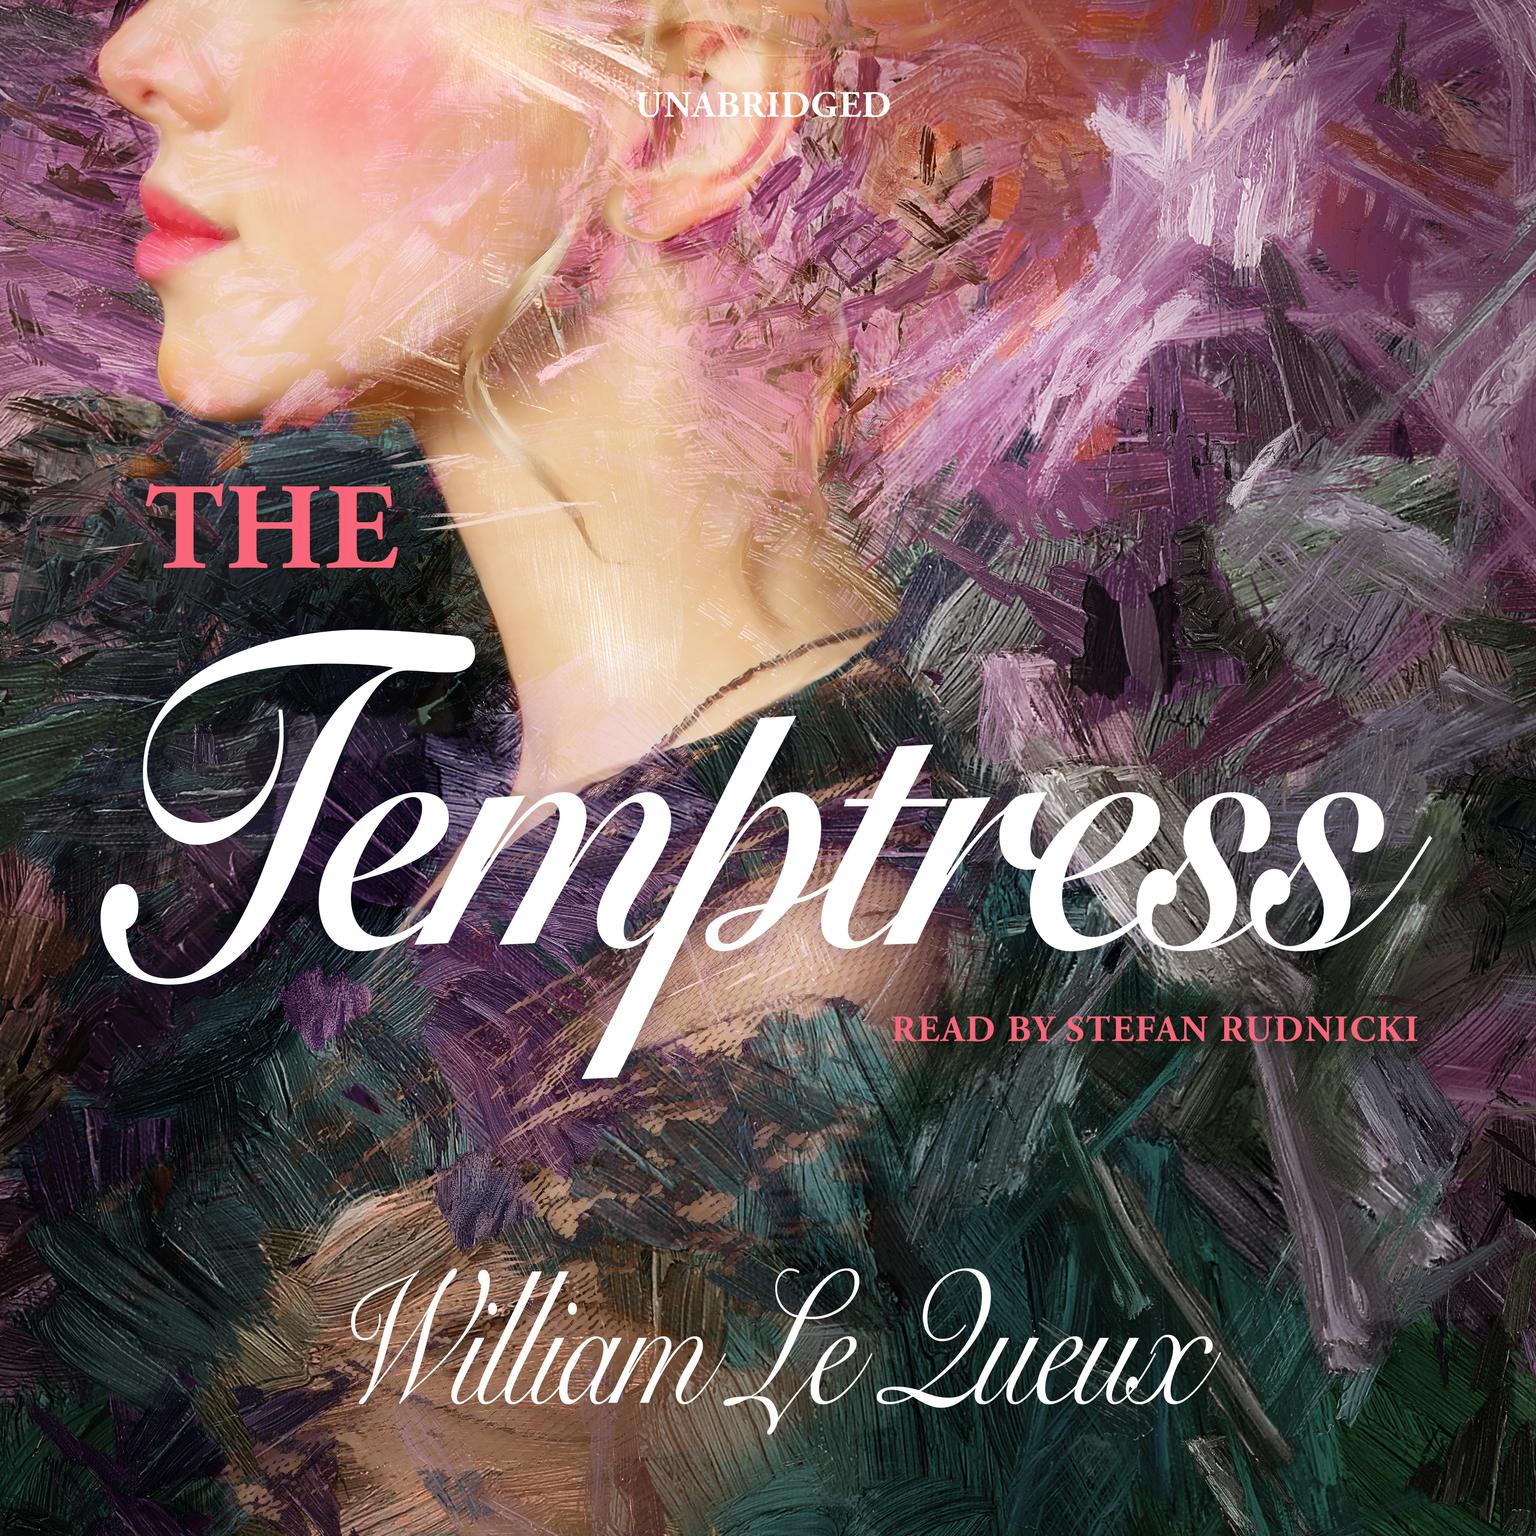 The Temptress Audiobook, by William Le Queux